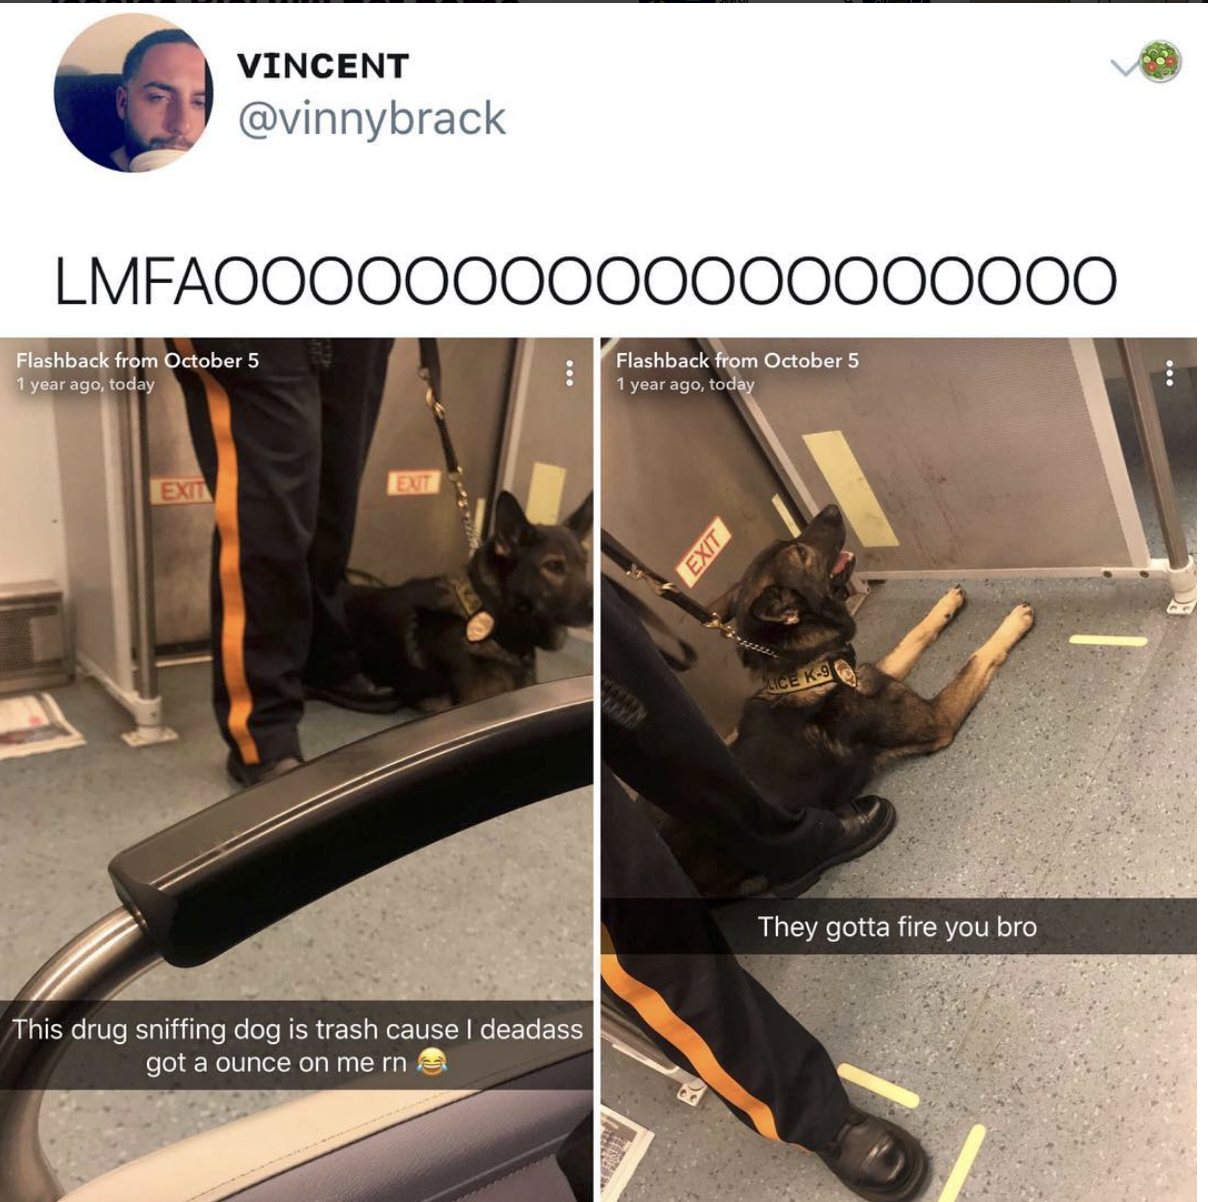 ain t no snitch dog - Vincent LMFAO000000000000000000 Flashback from October 5 1 year ago today Flashback from October 5 1 year ago, toda They gotta fire you bro This drug sniffing dog is trash cause I deadass got a ounce on me in